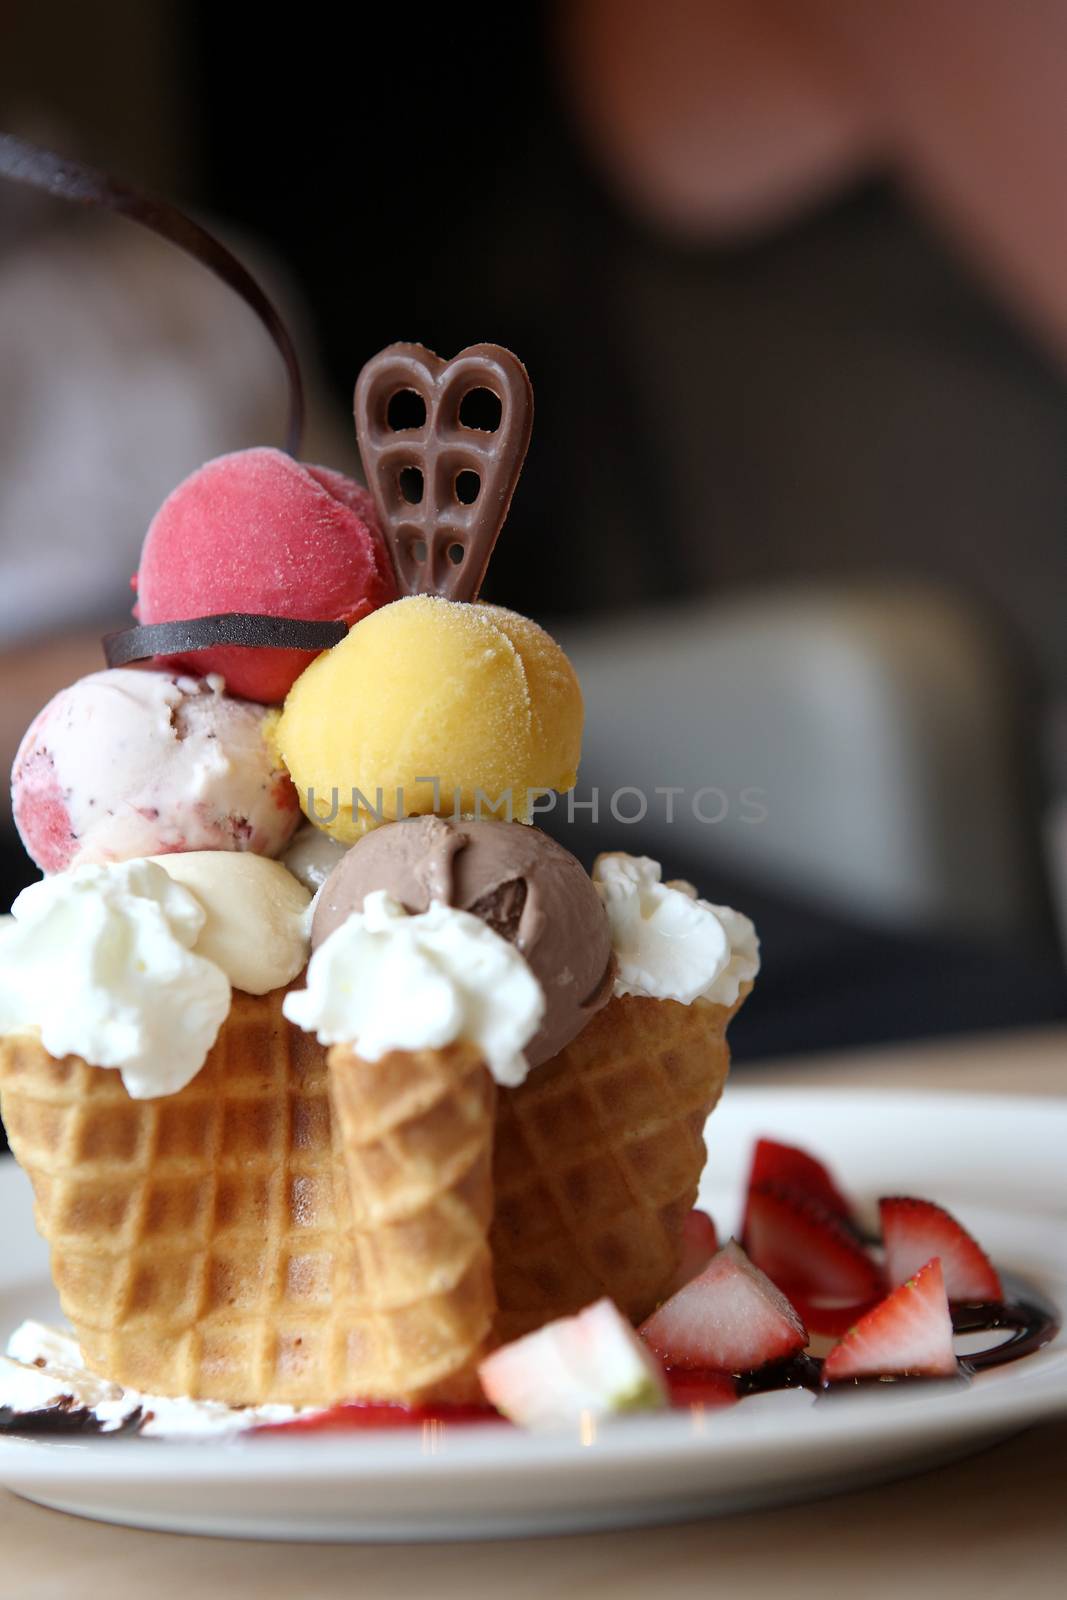 Waffles with ice cream and fruits  by piyato